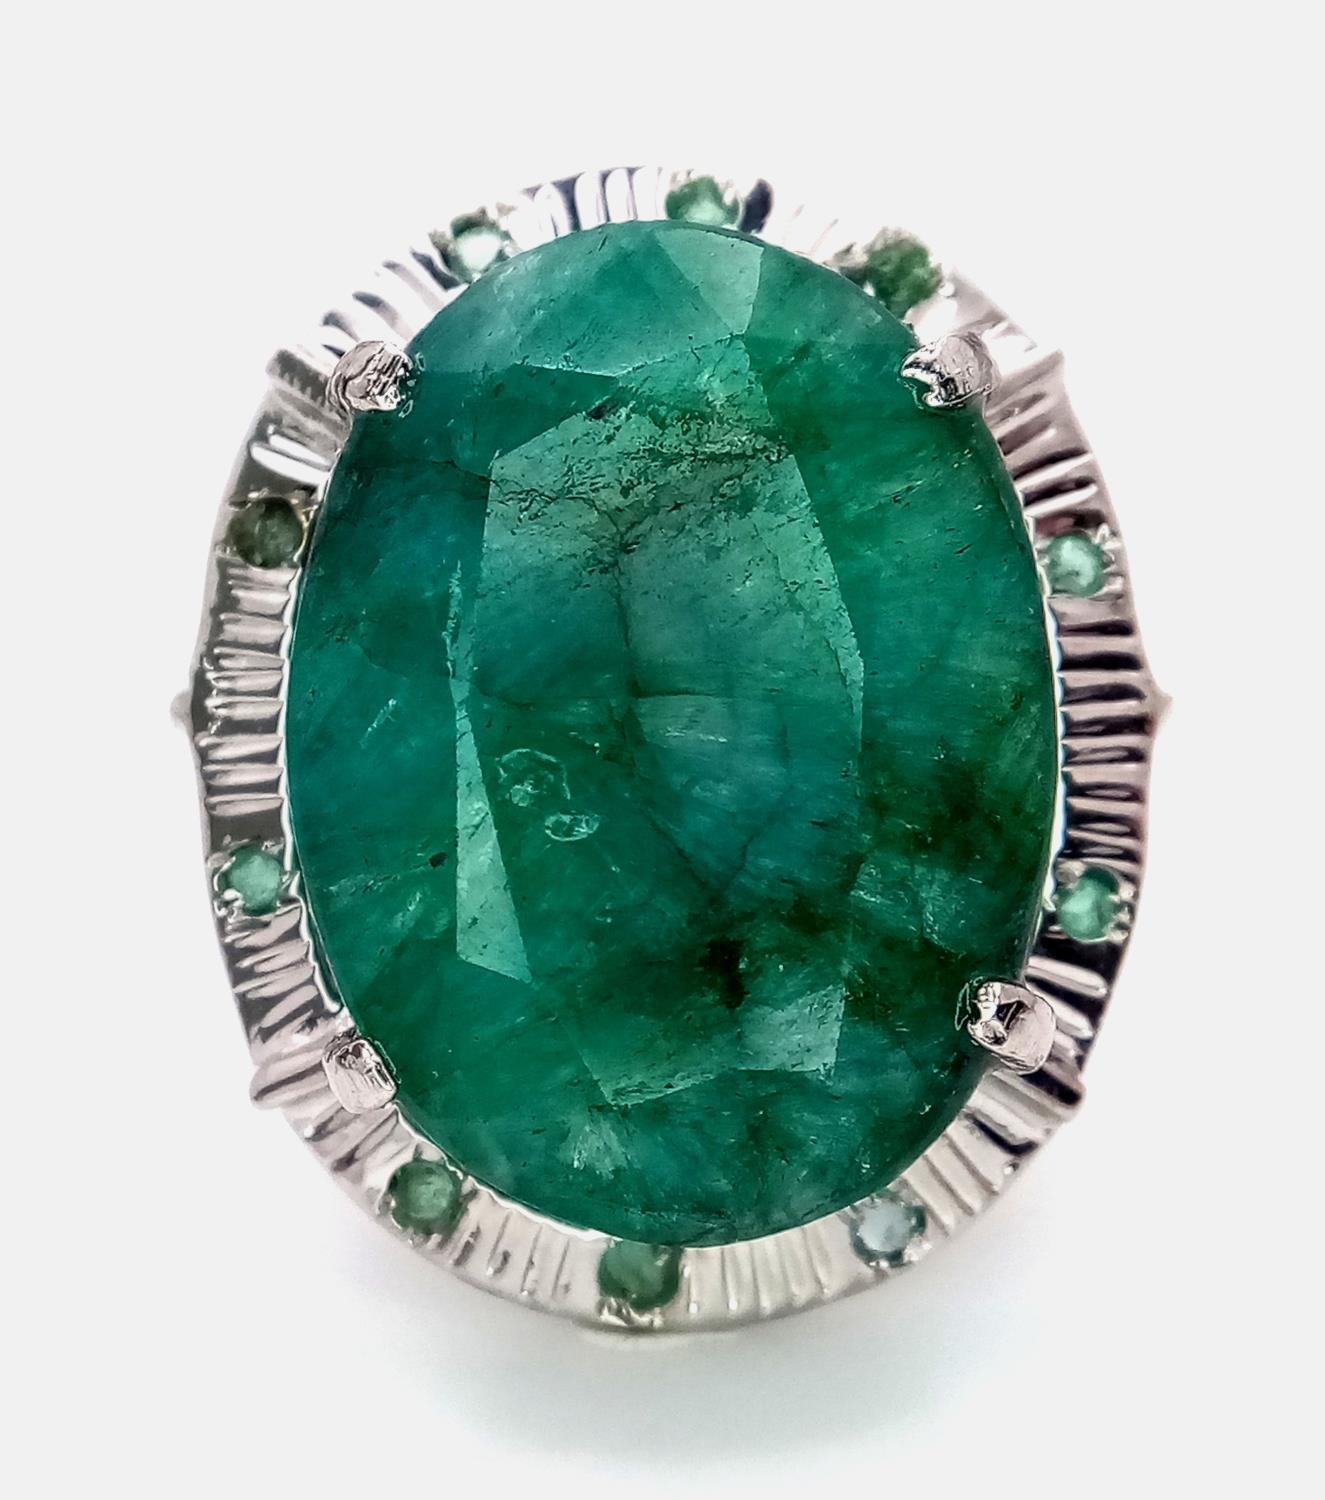 A 48ct Brazilian Emerald Silver Ring. Set in 925 Sterling Silver. W- 17.5g. Comes in a - Image 2 of 6